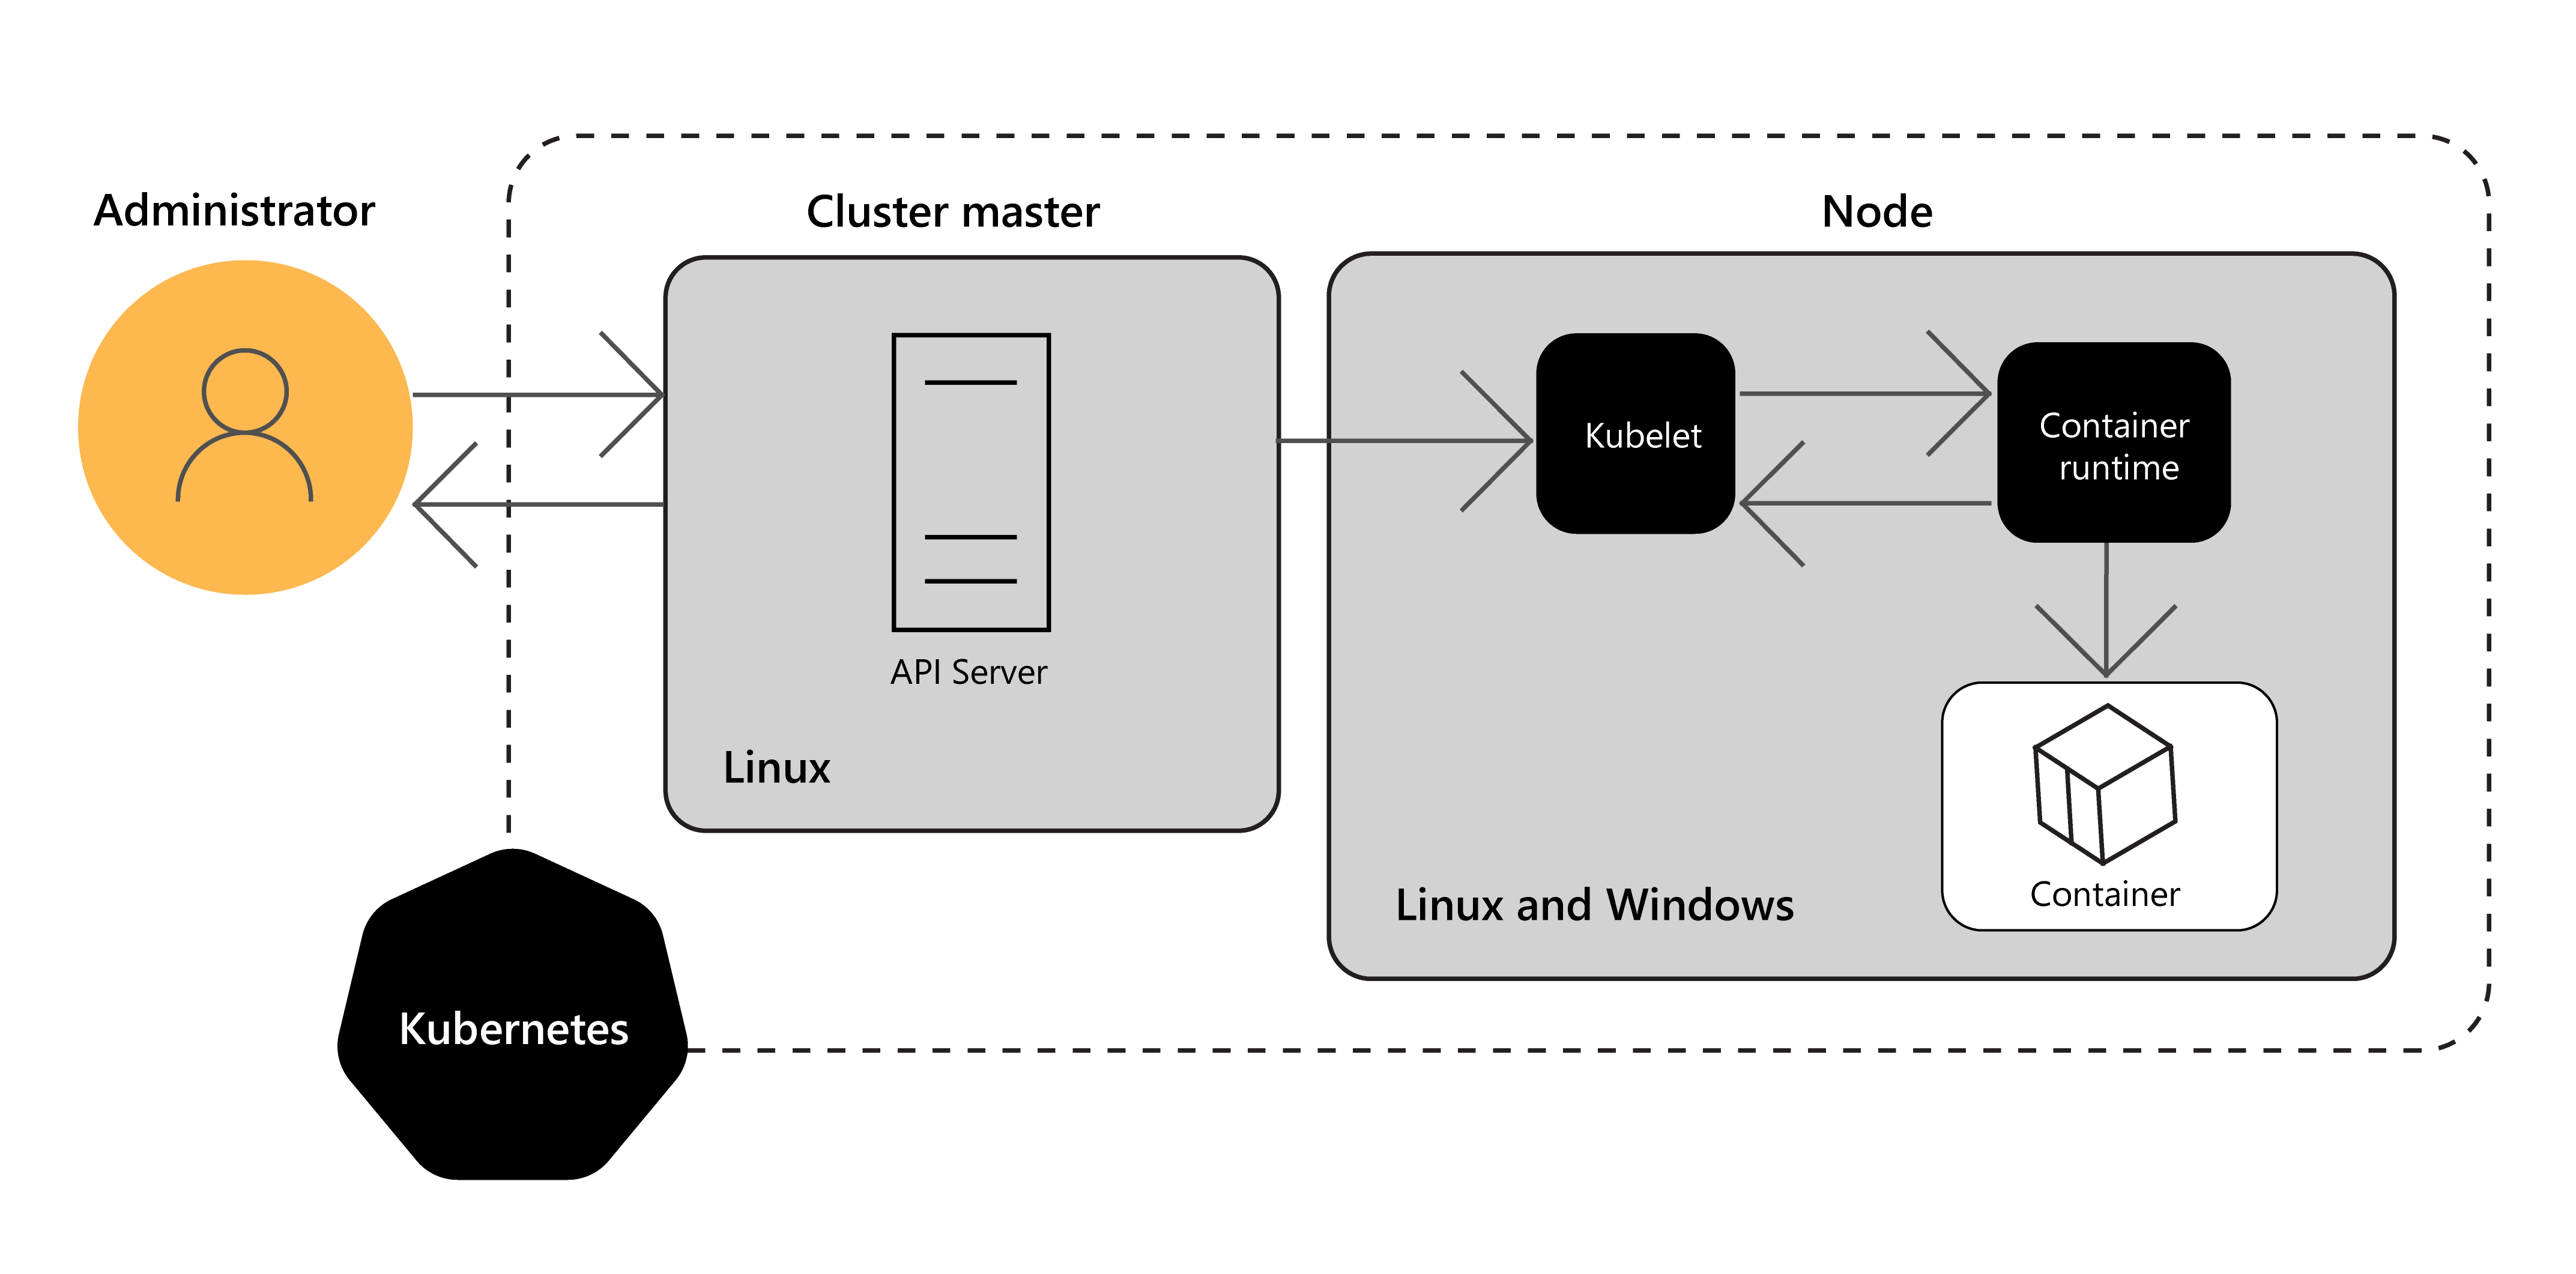 A diagram to exemplify the components of a Kubernetes cluster with representations for master and worker node with the sub-components API server, kubelet, container runtime and container instances.